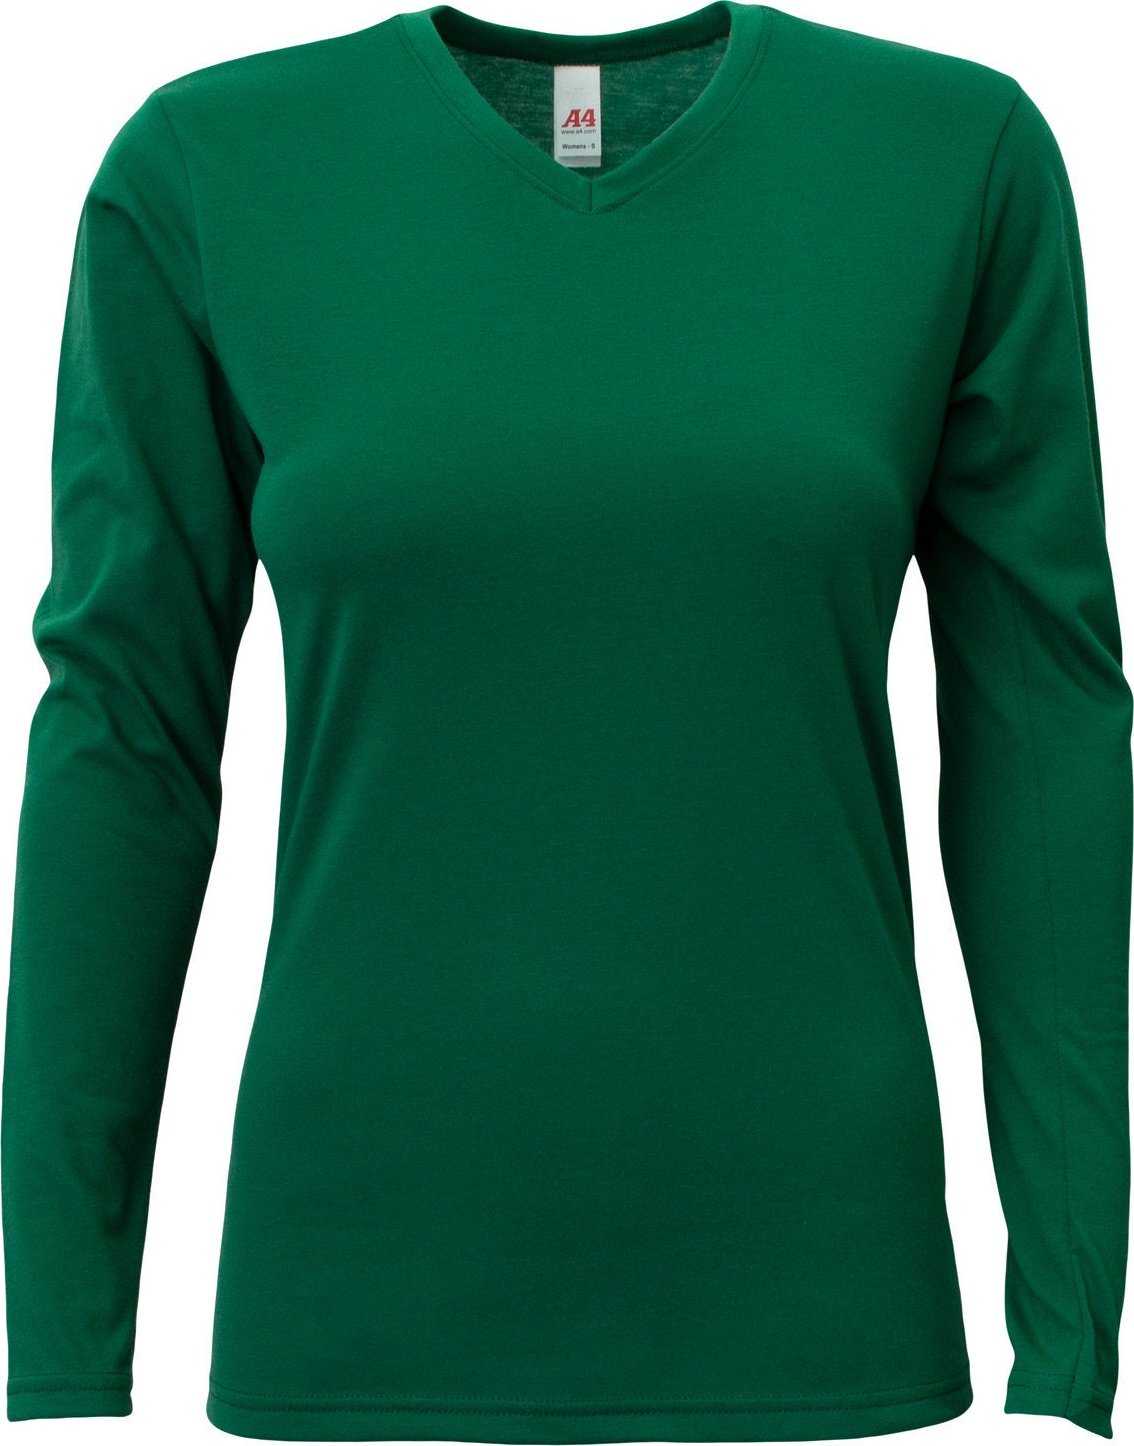 A4 NW3029 Ladies' Long-Sleeve Softek V-Neck T-Shirt - FOREST - HIT a Double - 2